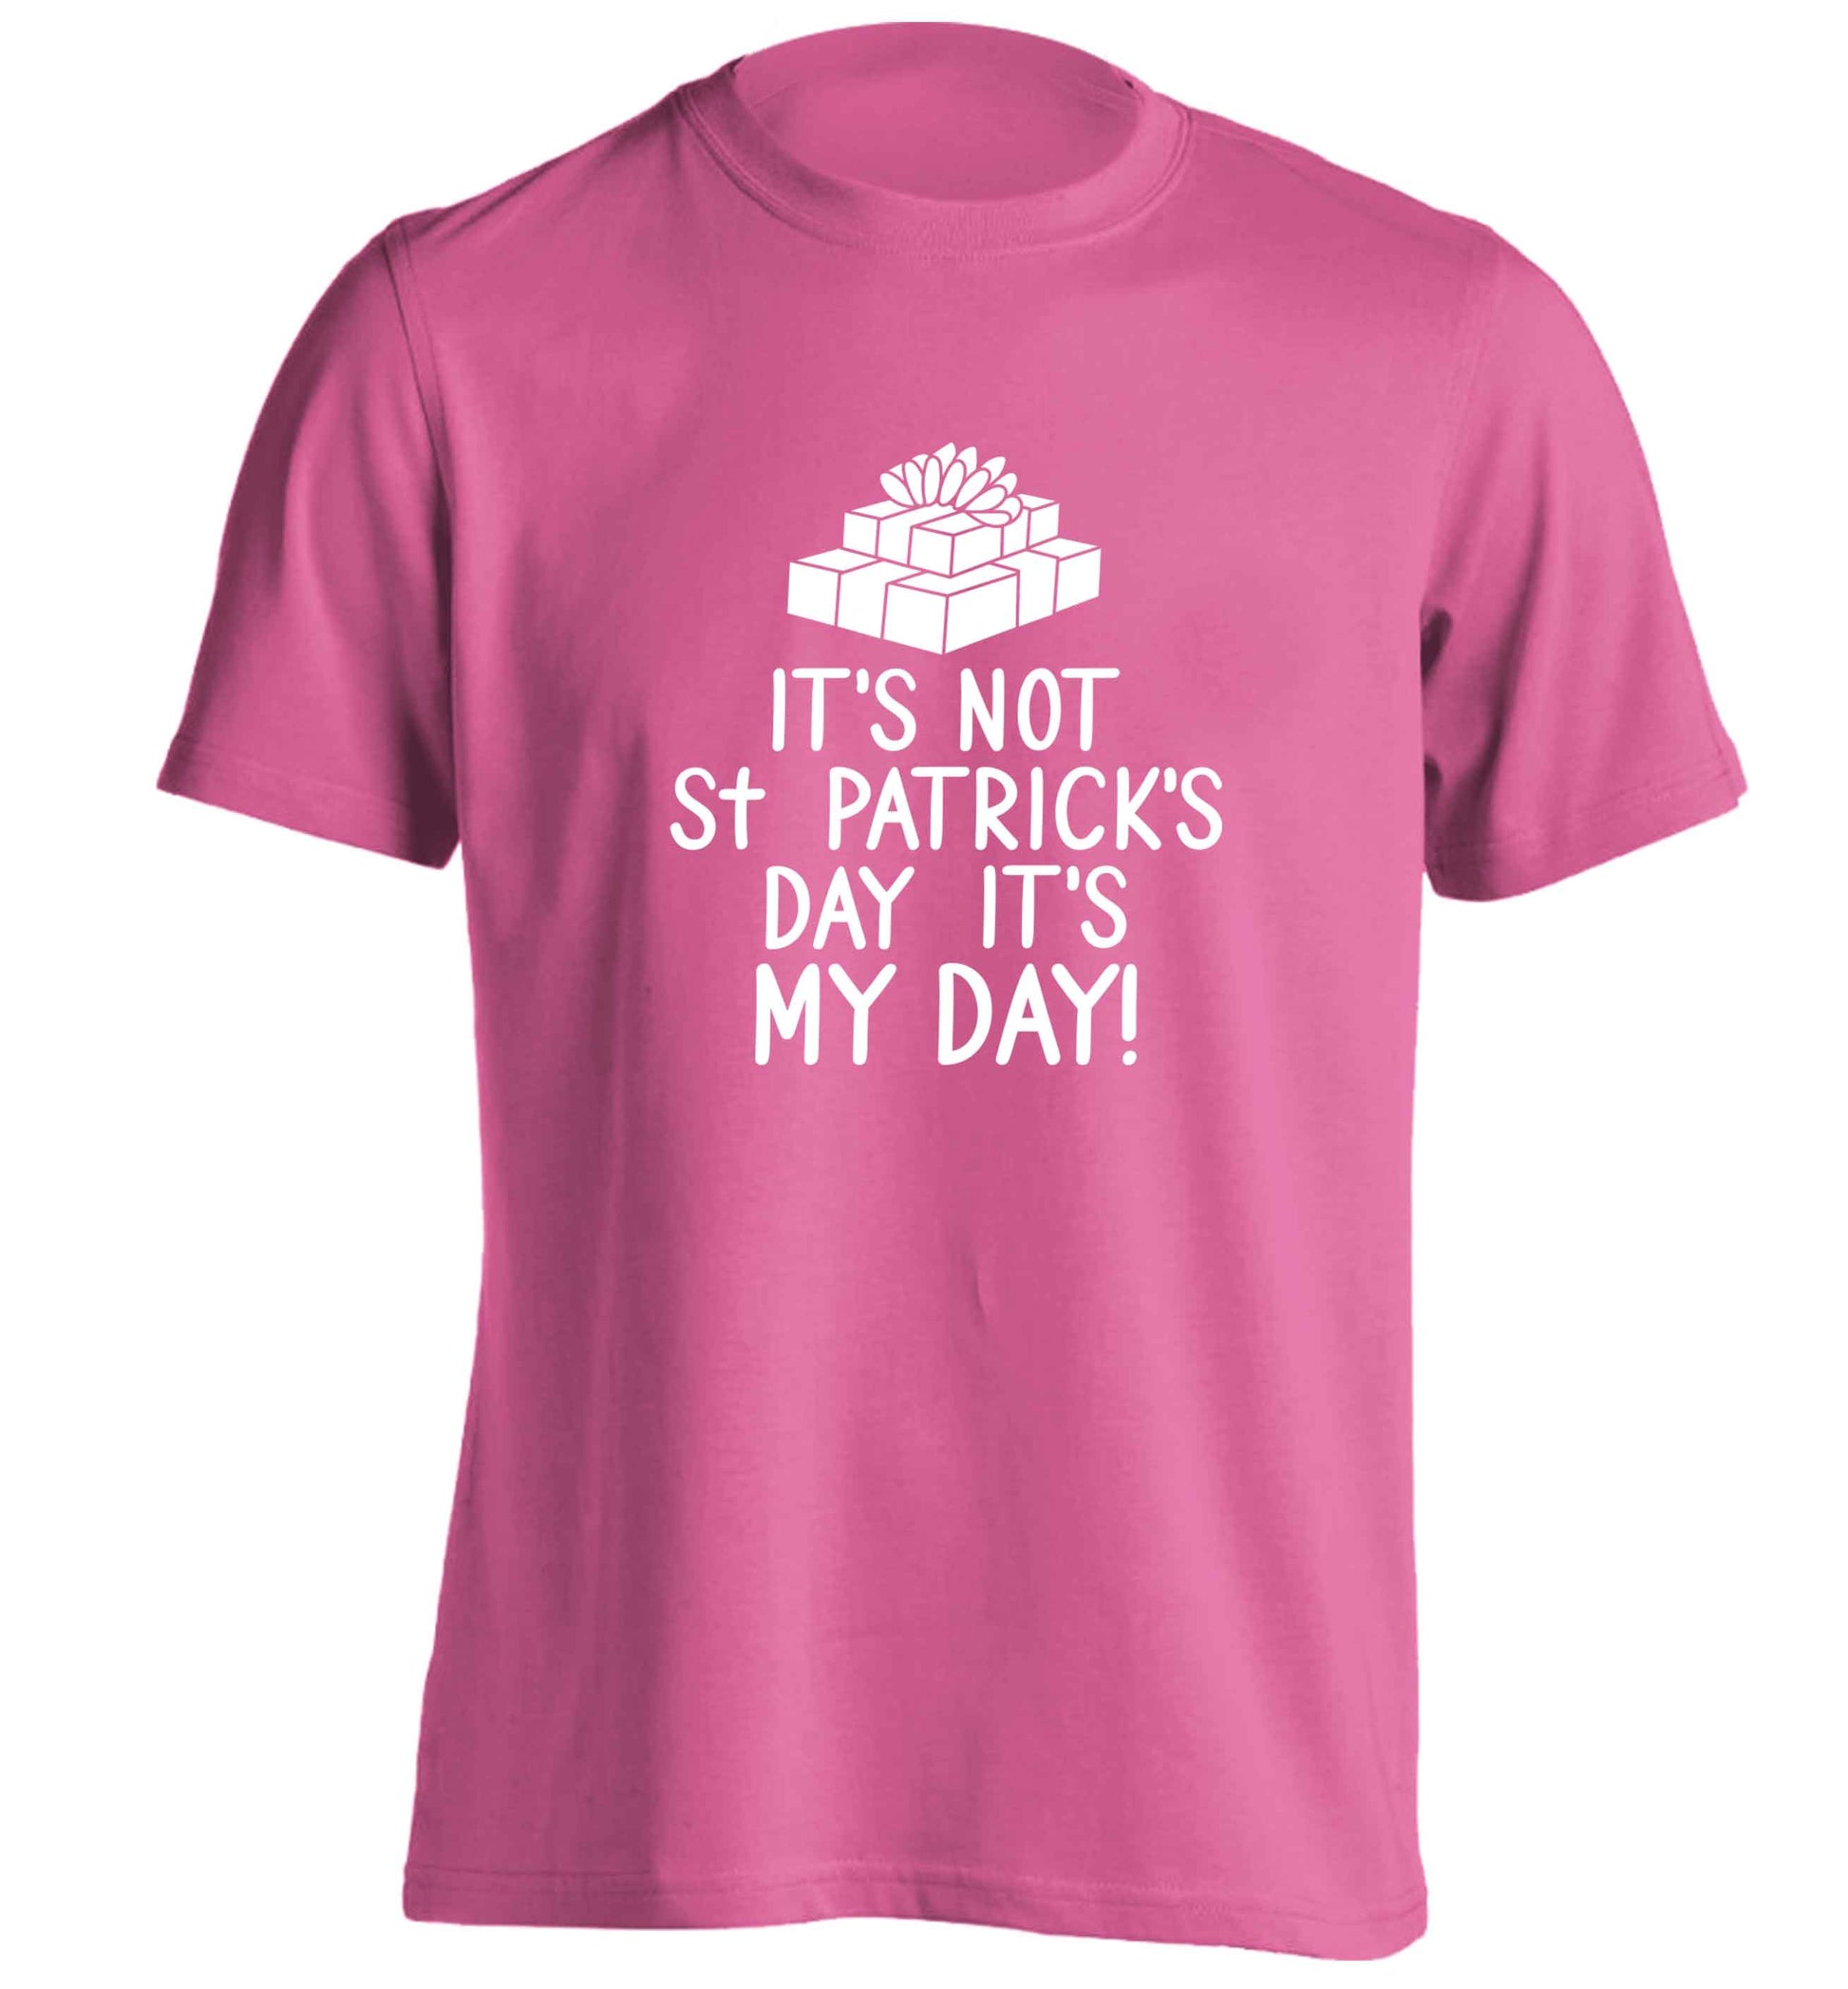 Funny gifts for your mum on mother's dayor her birthday! It's not St Patricks day it's my day adults unisex pink Tshirt 2XL